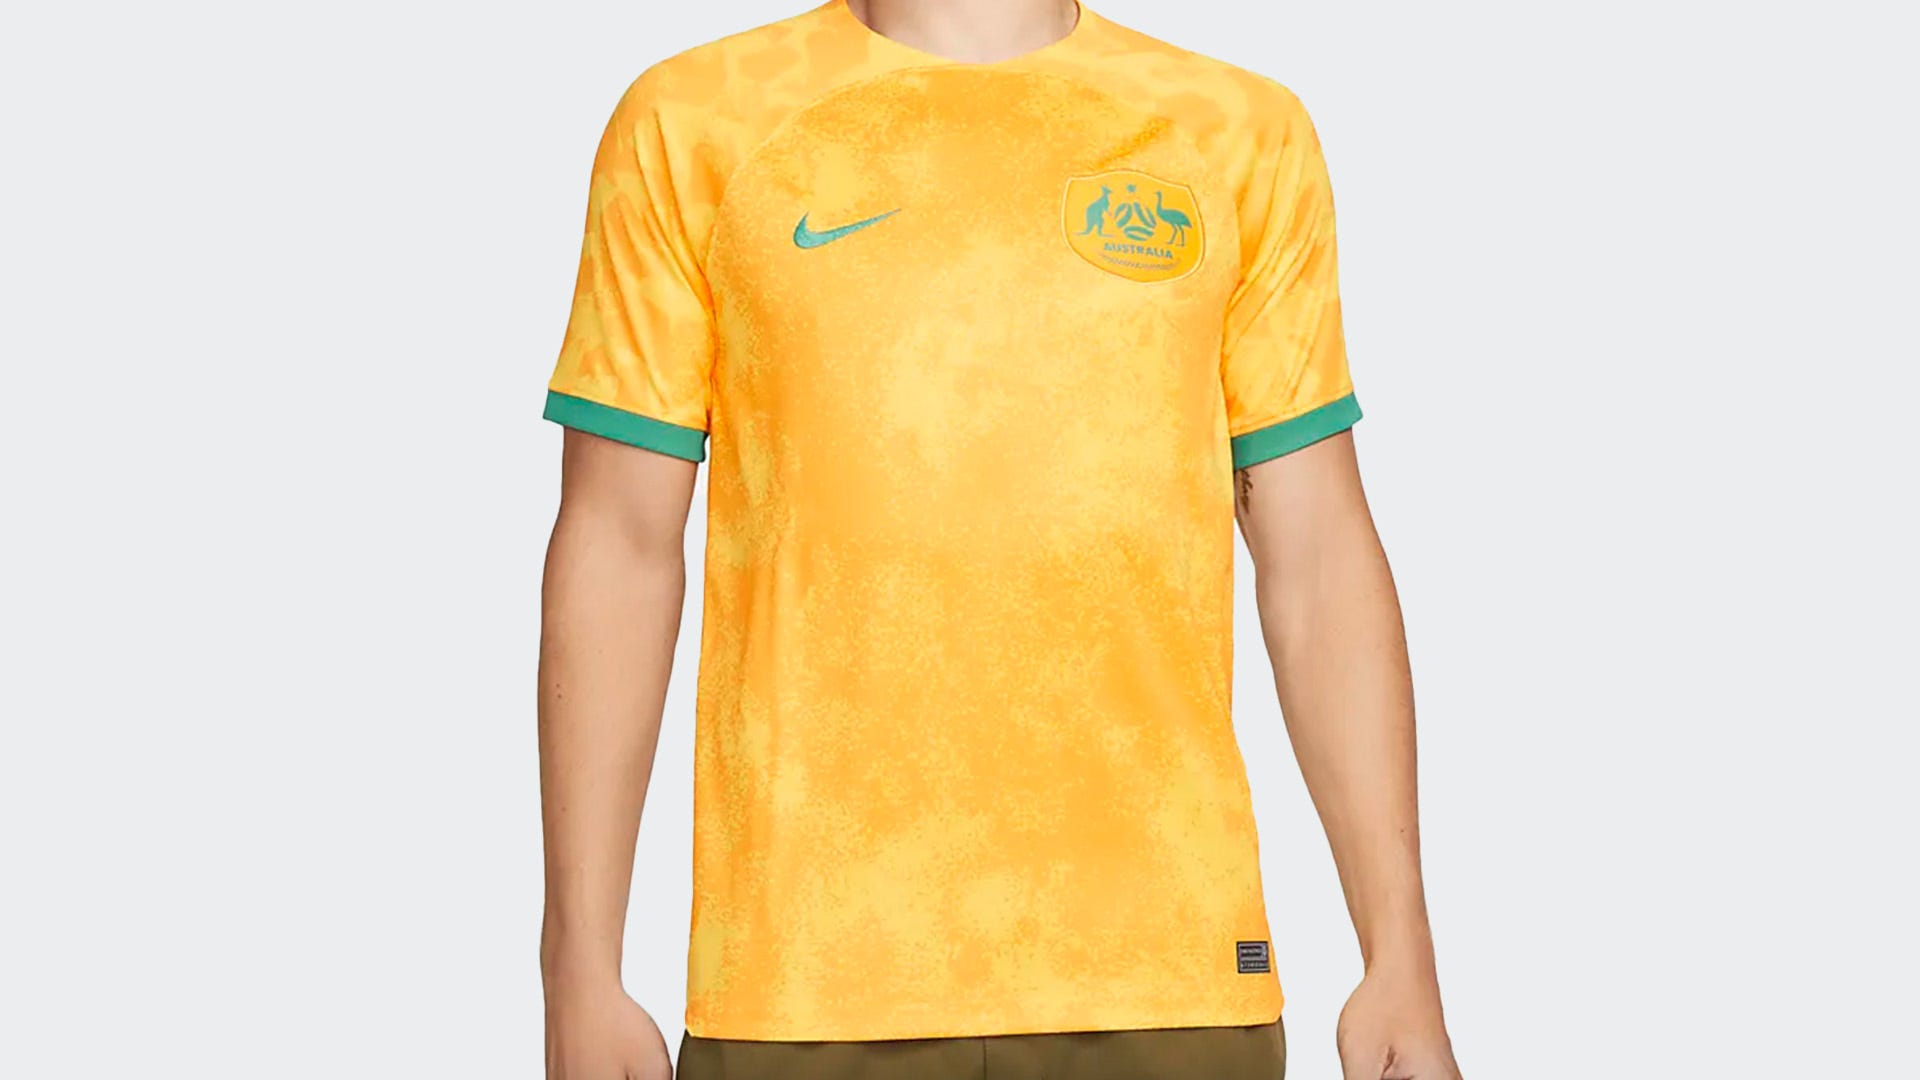 Australia World Cup kit and merch 2022: Where can I buy it and how much ...